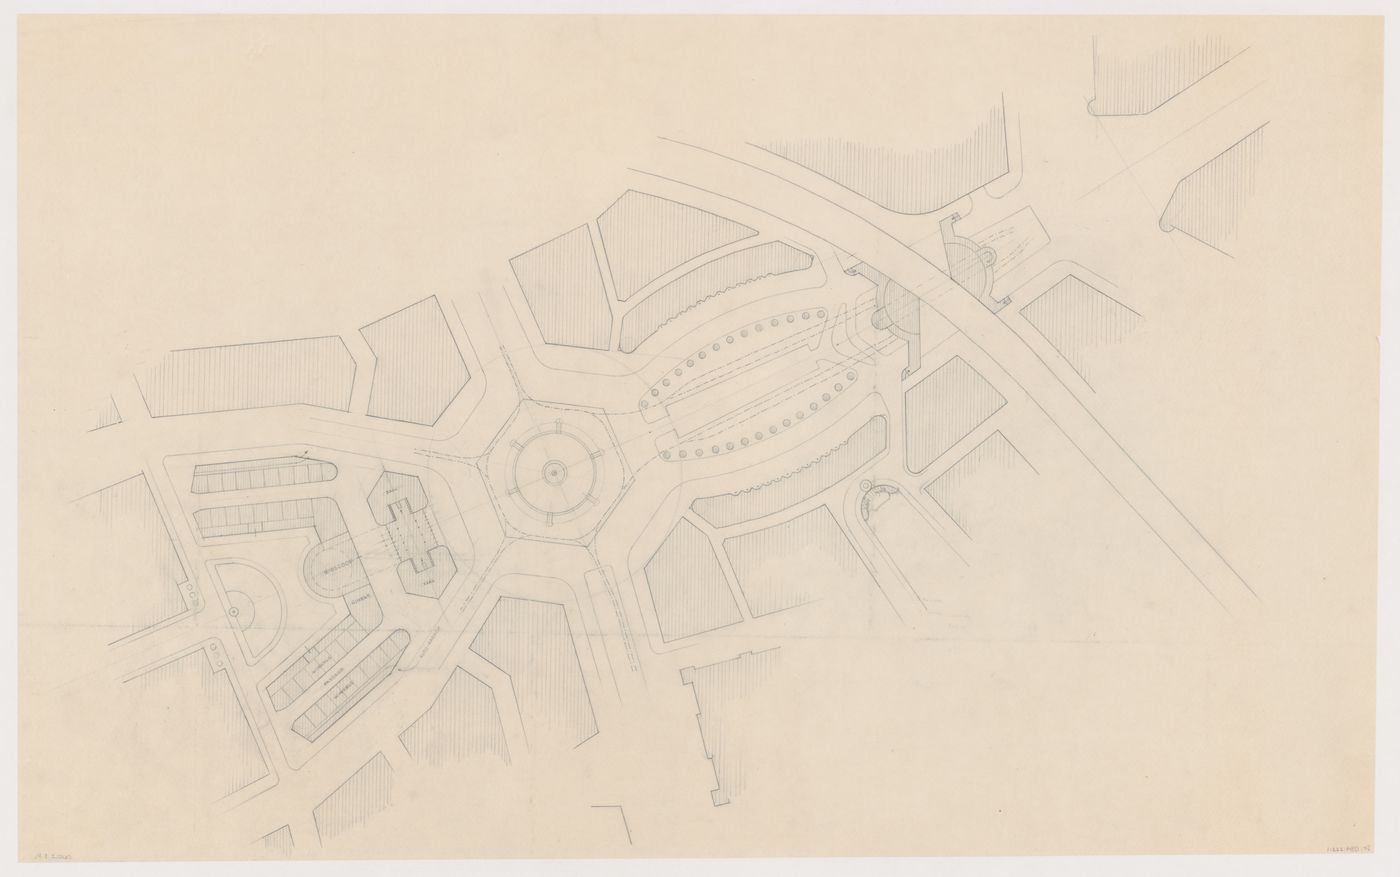 Site plan for the reconstruction of the Hofplein (city centre) showing Industriegebouw Plan A, other mixed-use developments, monument plaza and Café Viaduct, Rotterdam, Netherlands